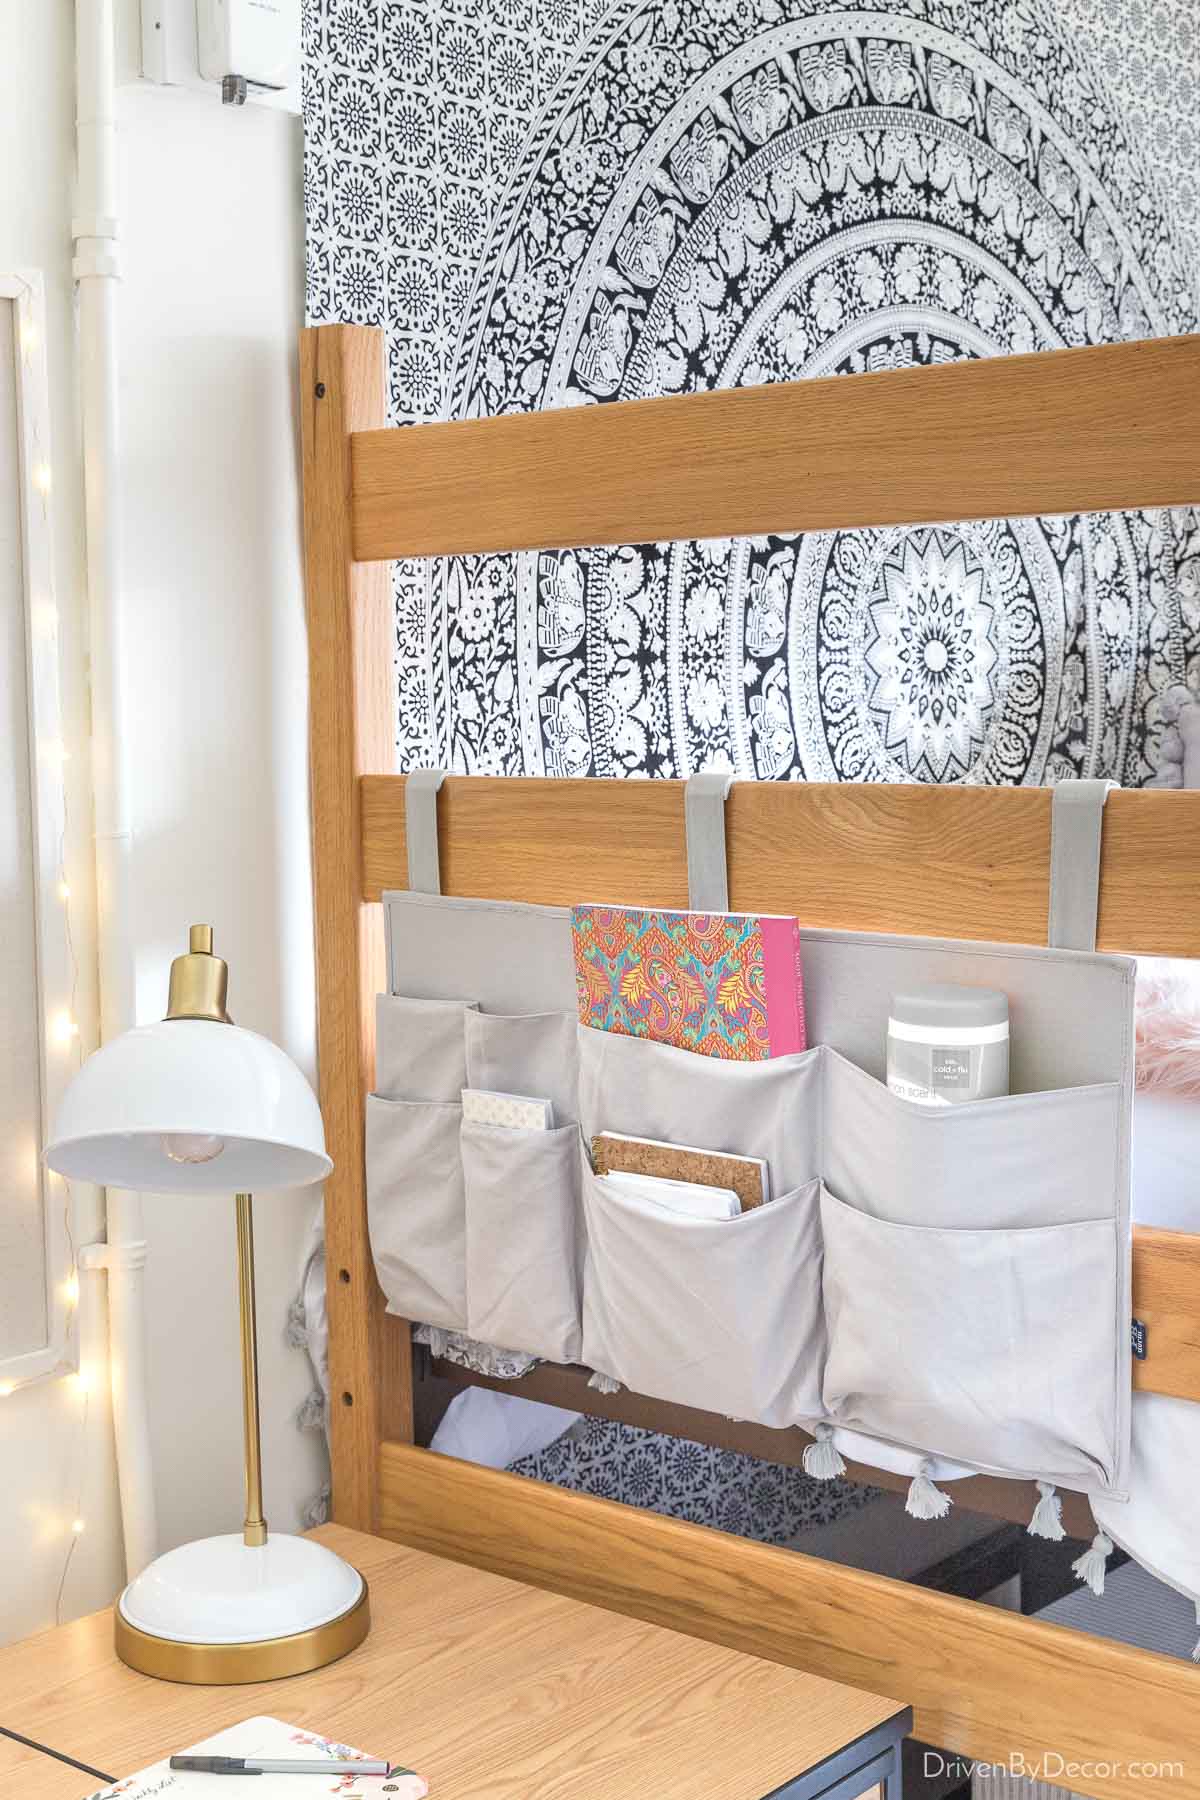 Bedside organizer that part of my college packing list